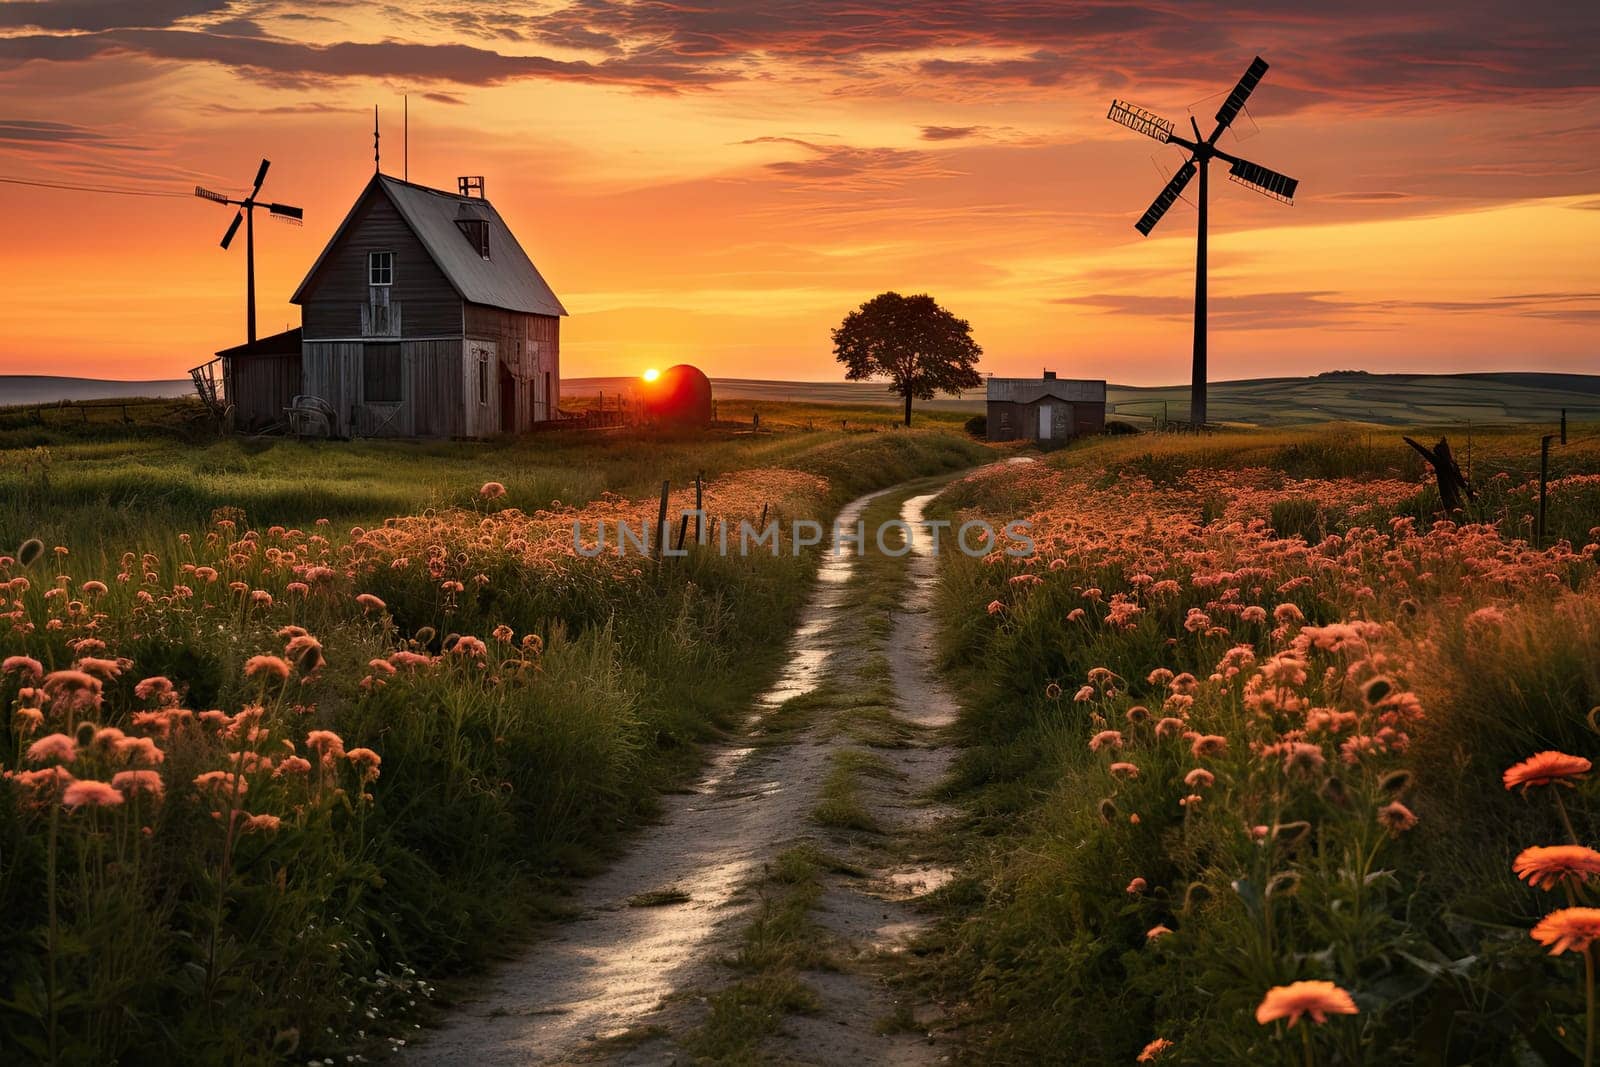 A Serene Journey through the Countryside, Adorned with Charming Windmills